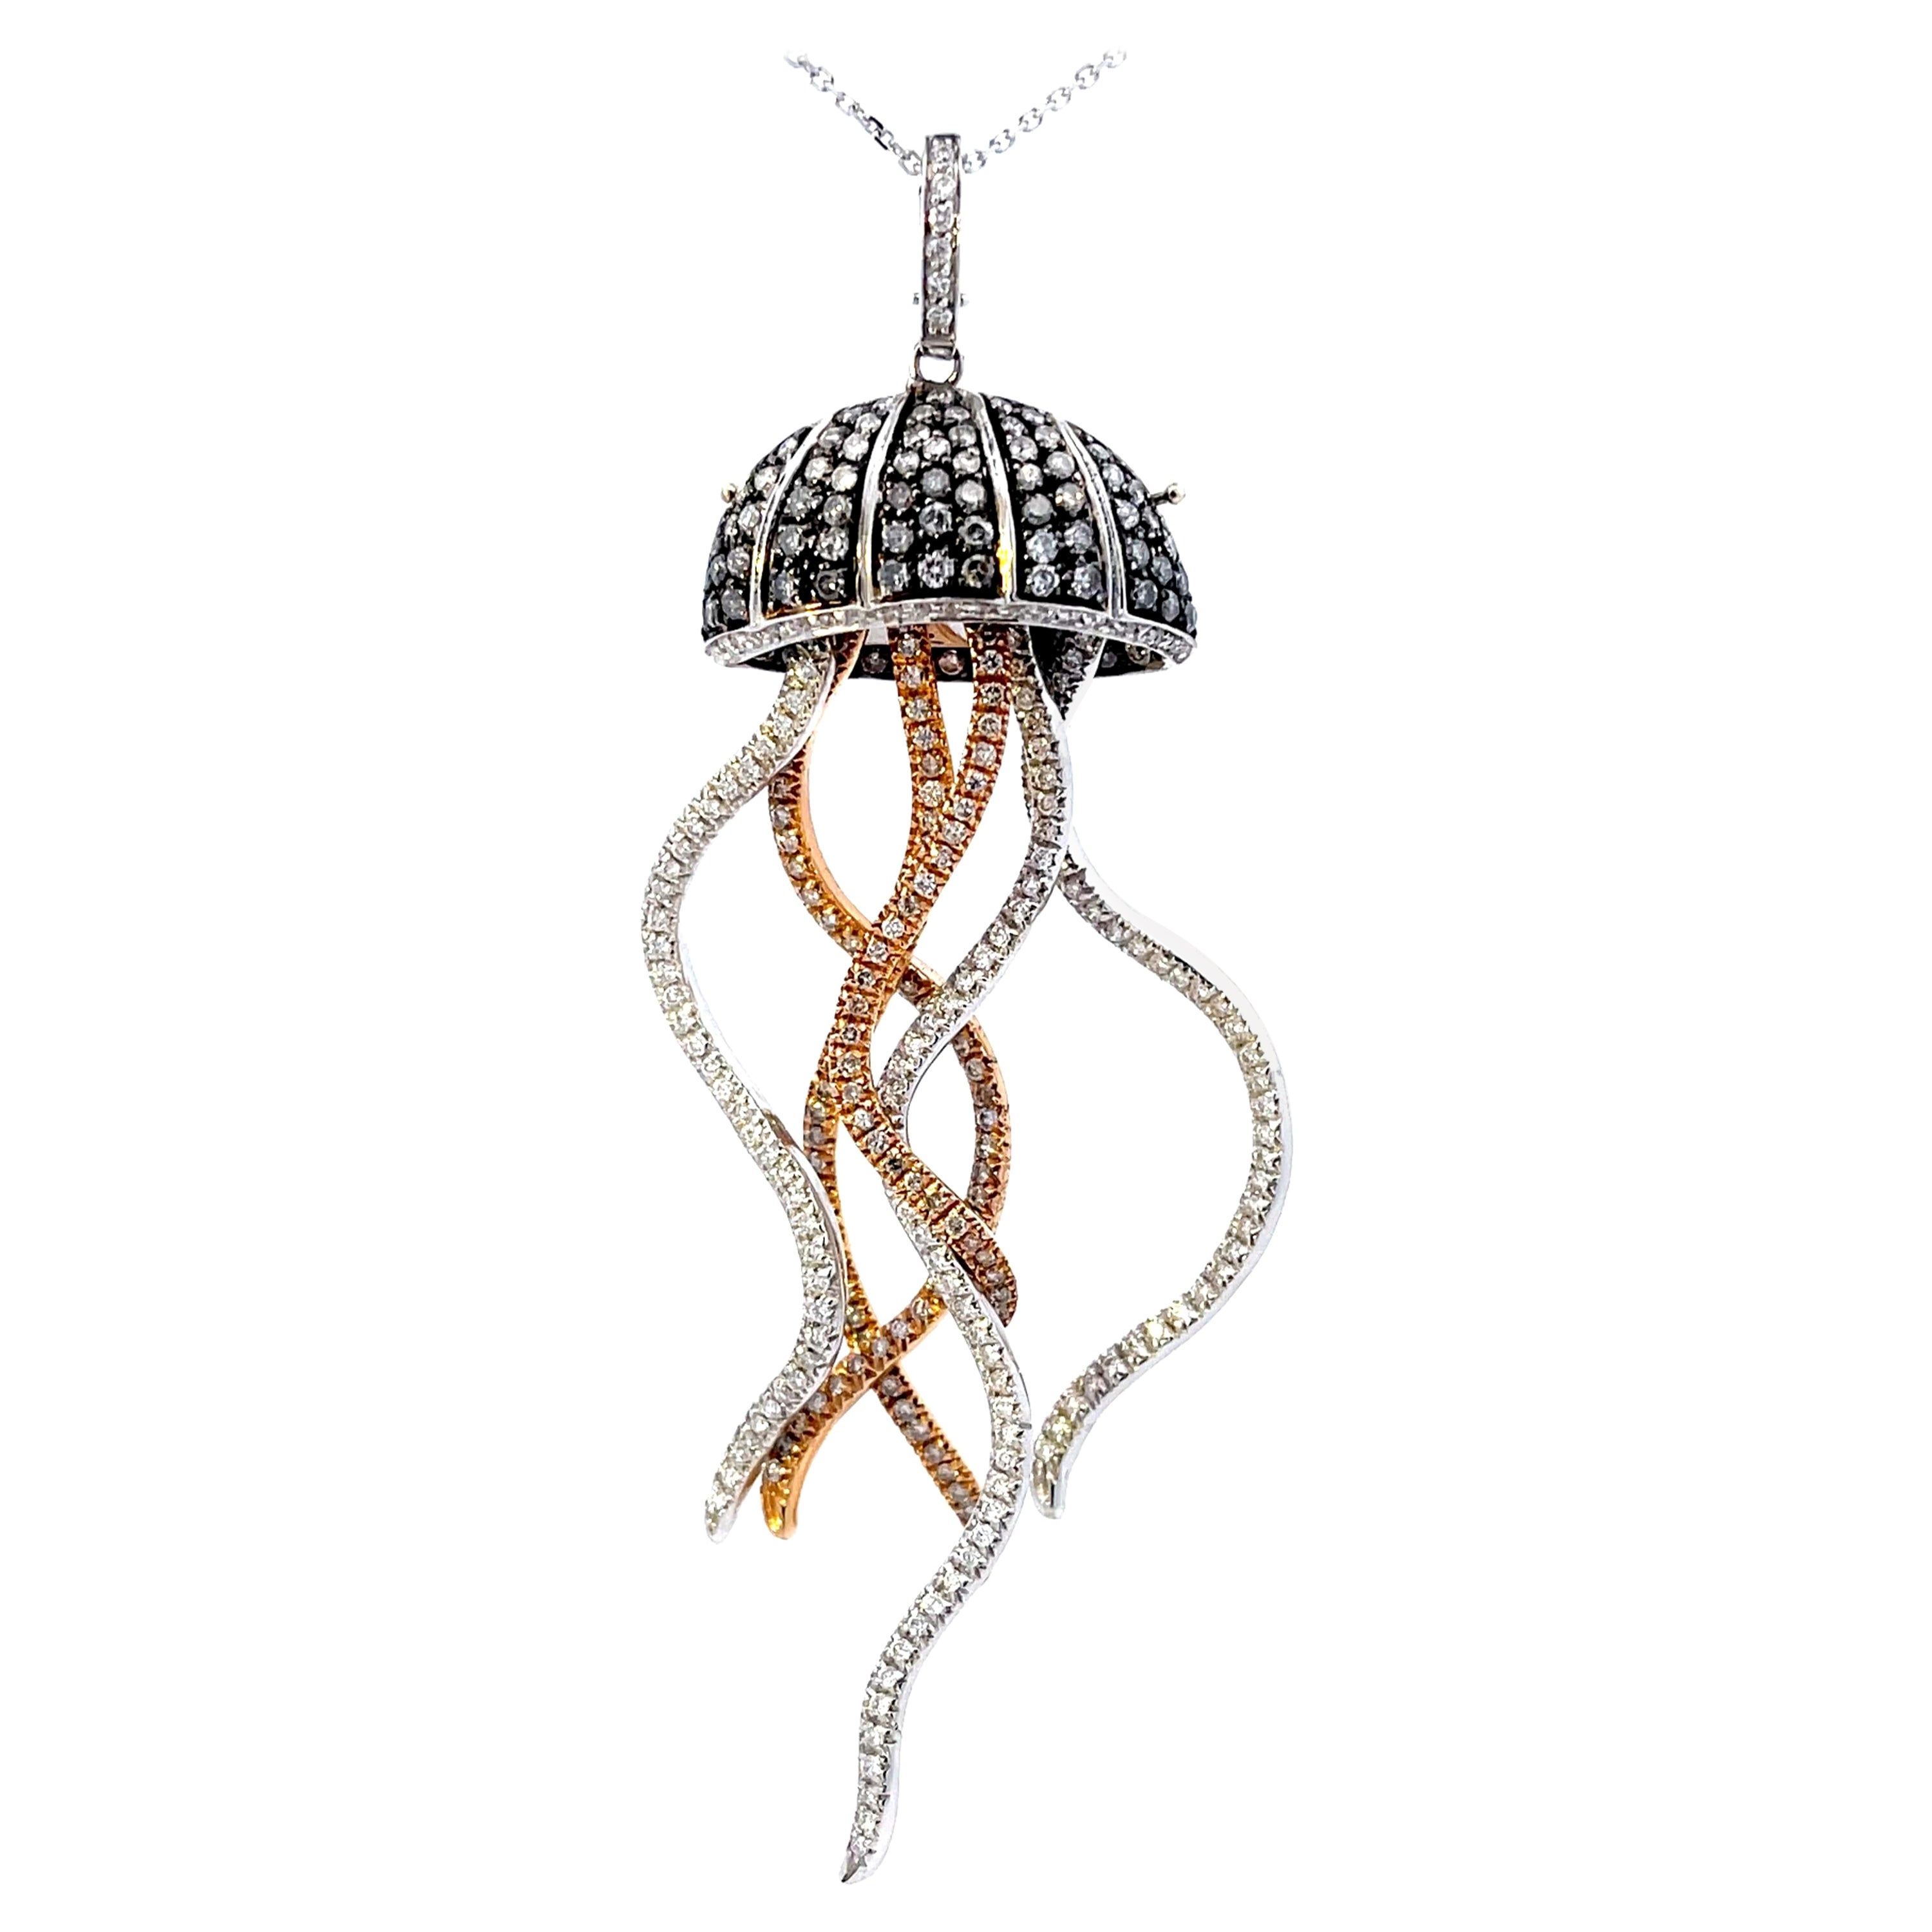 Diamond Jellyfish Necklace in 18k White Black and Rose Gold